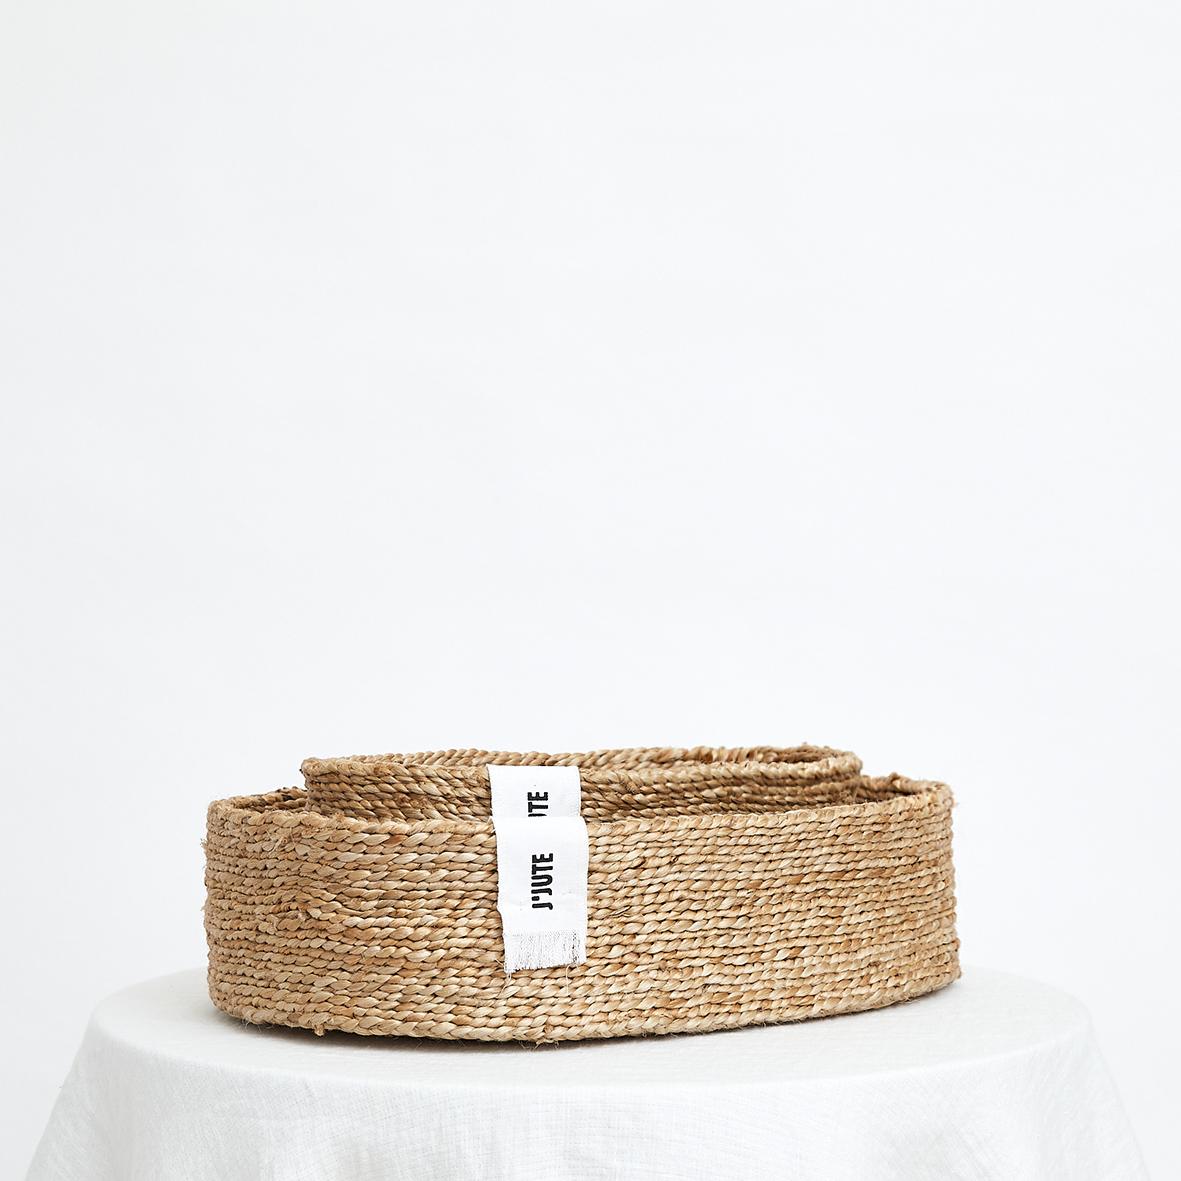 J'Jute Newport Jute Tray Baskets, Natural - Stacking set of 2

J'Jute is an Australian Luxury Home Brand that offers uncompromising quality handmade objects for the home. Each J'Jute style is designed by Taylor and Nicholas Barber in Bondi Beach,